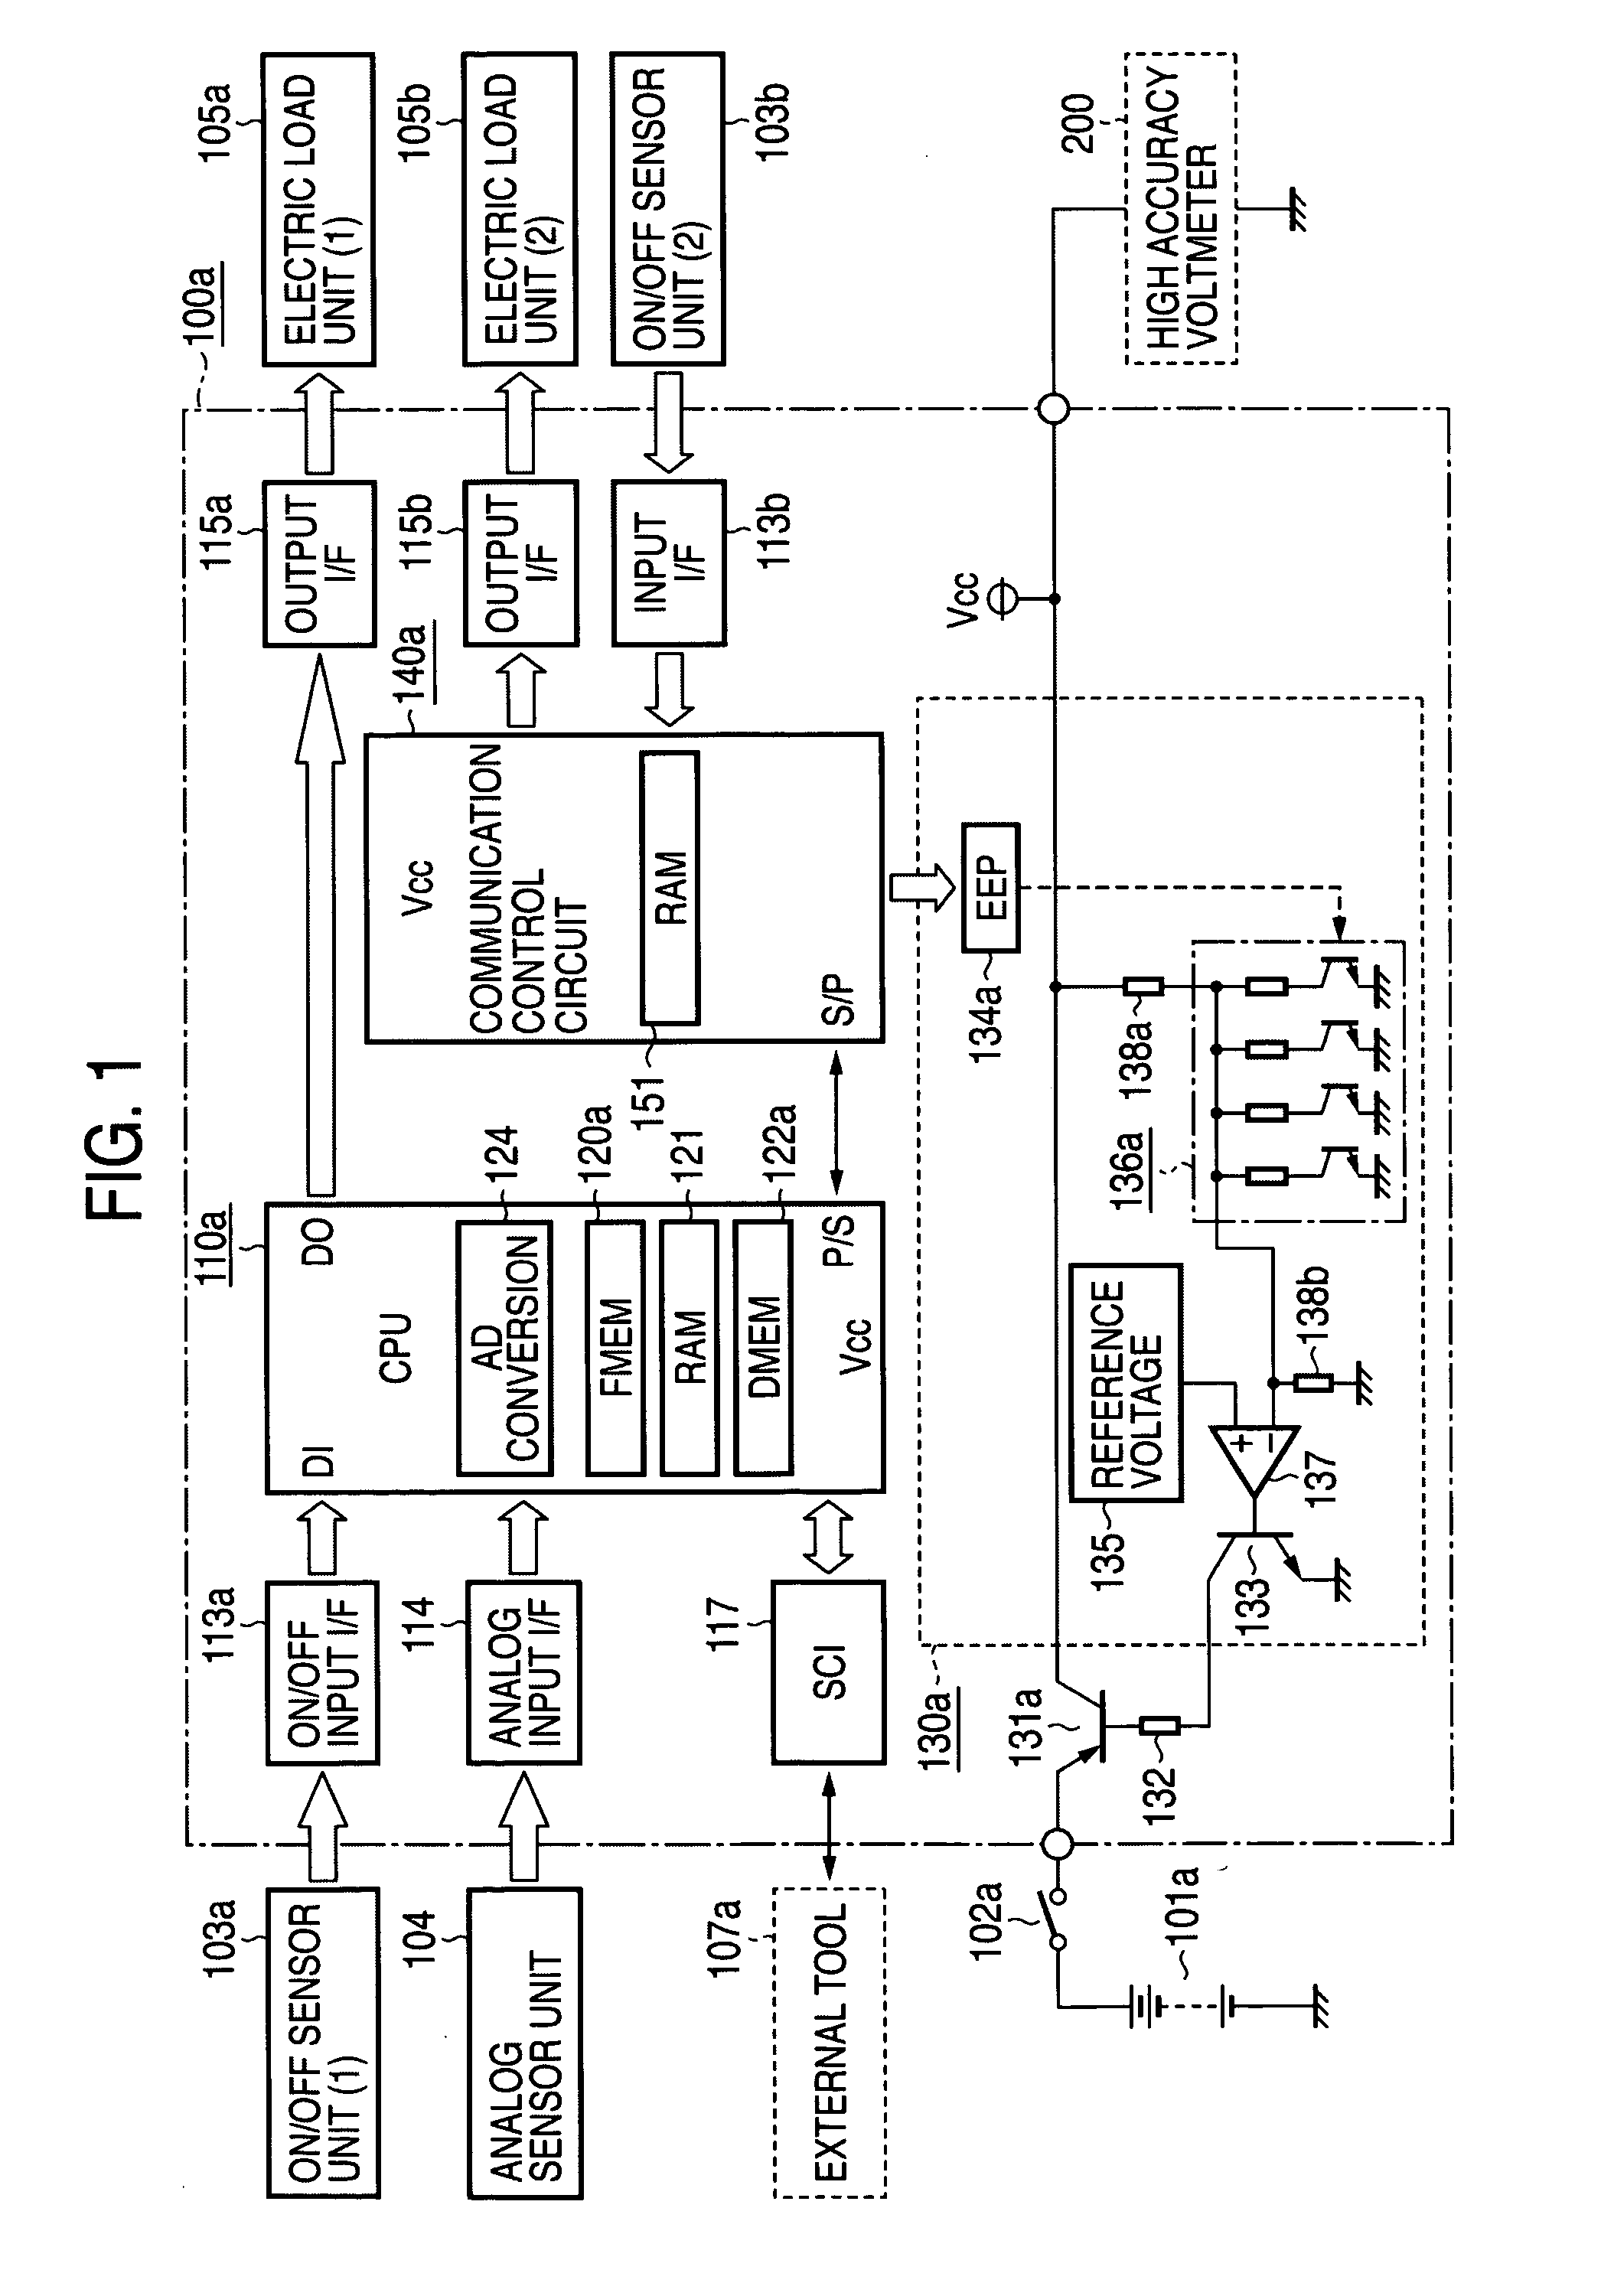 In-vehicle electronic control device